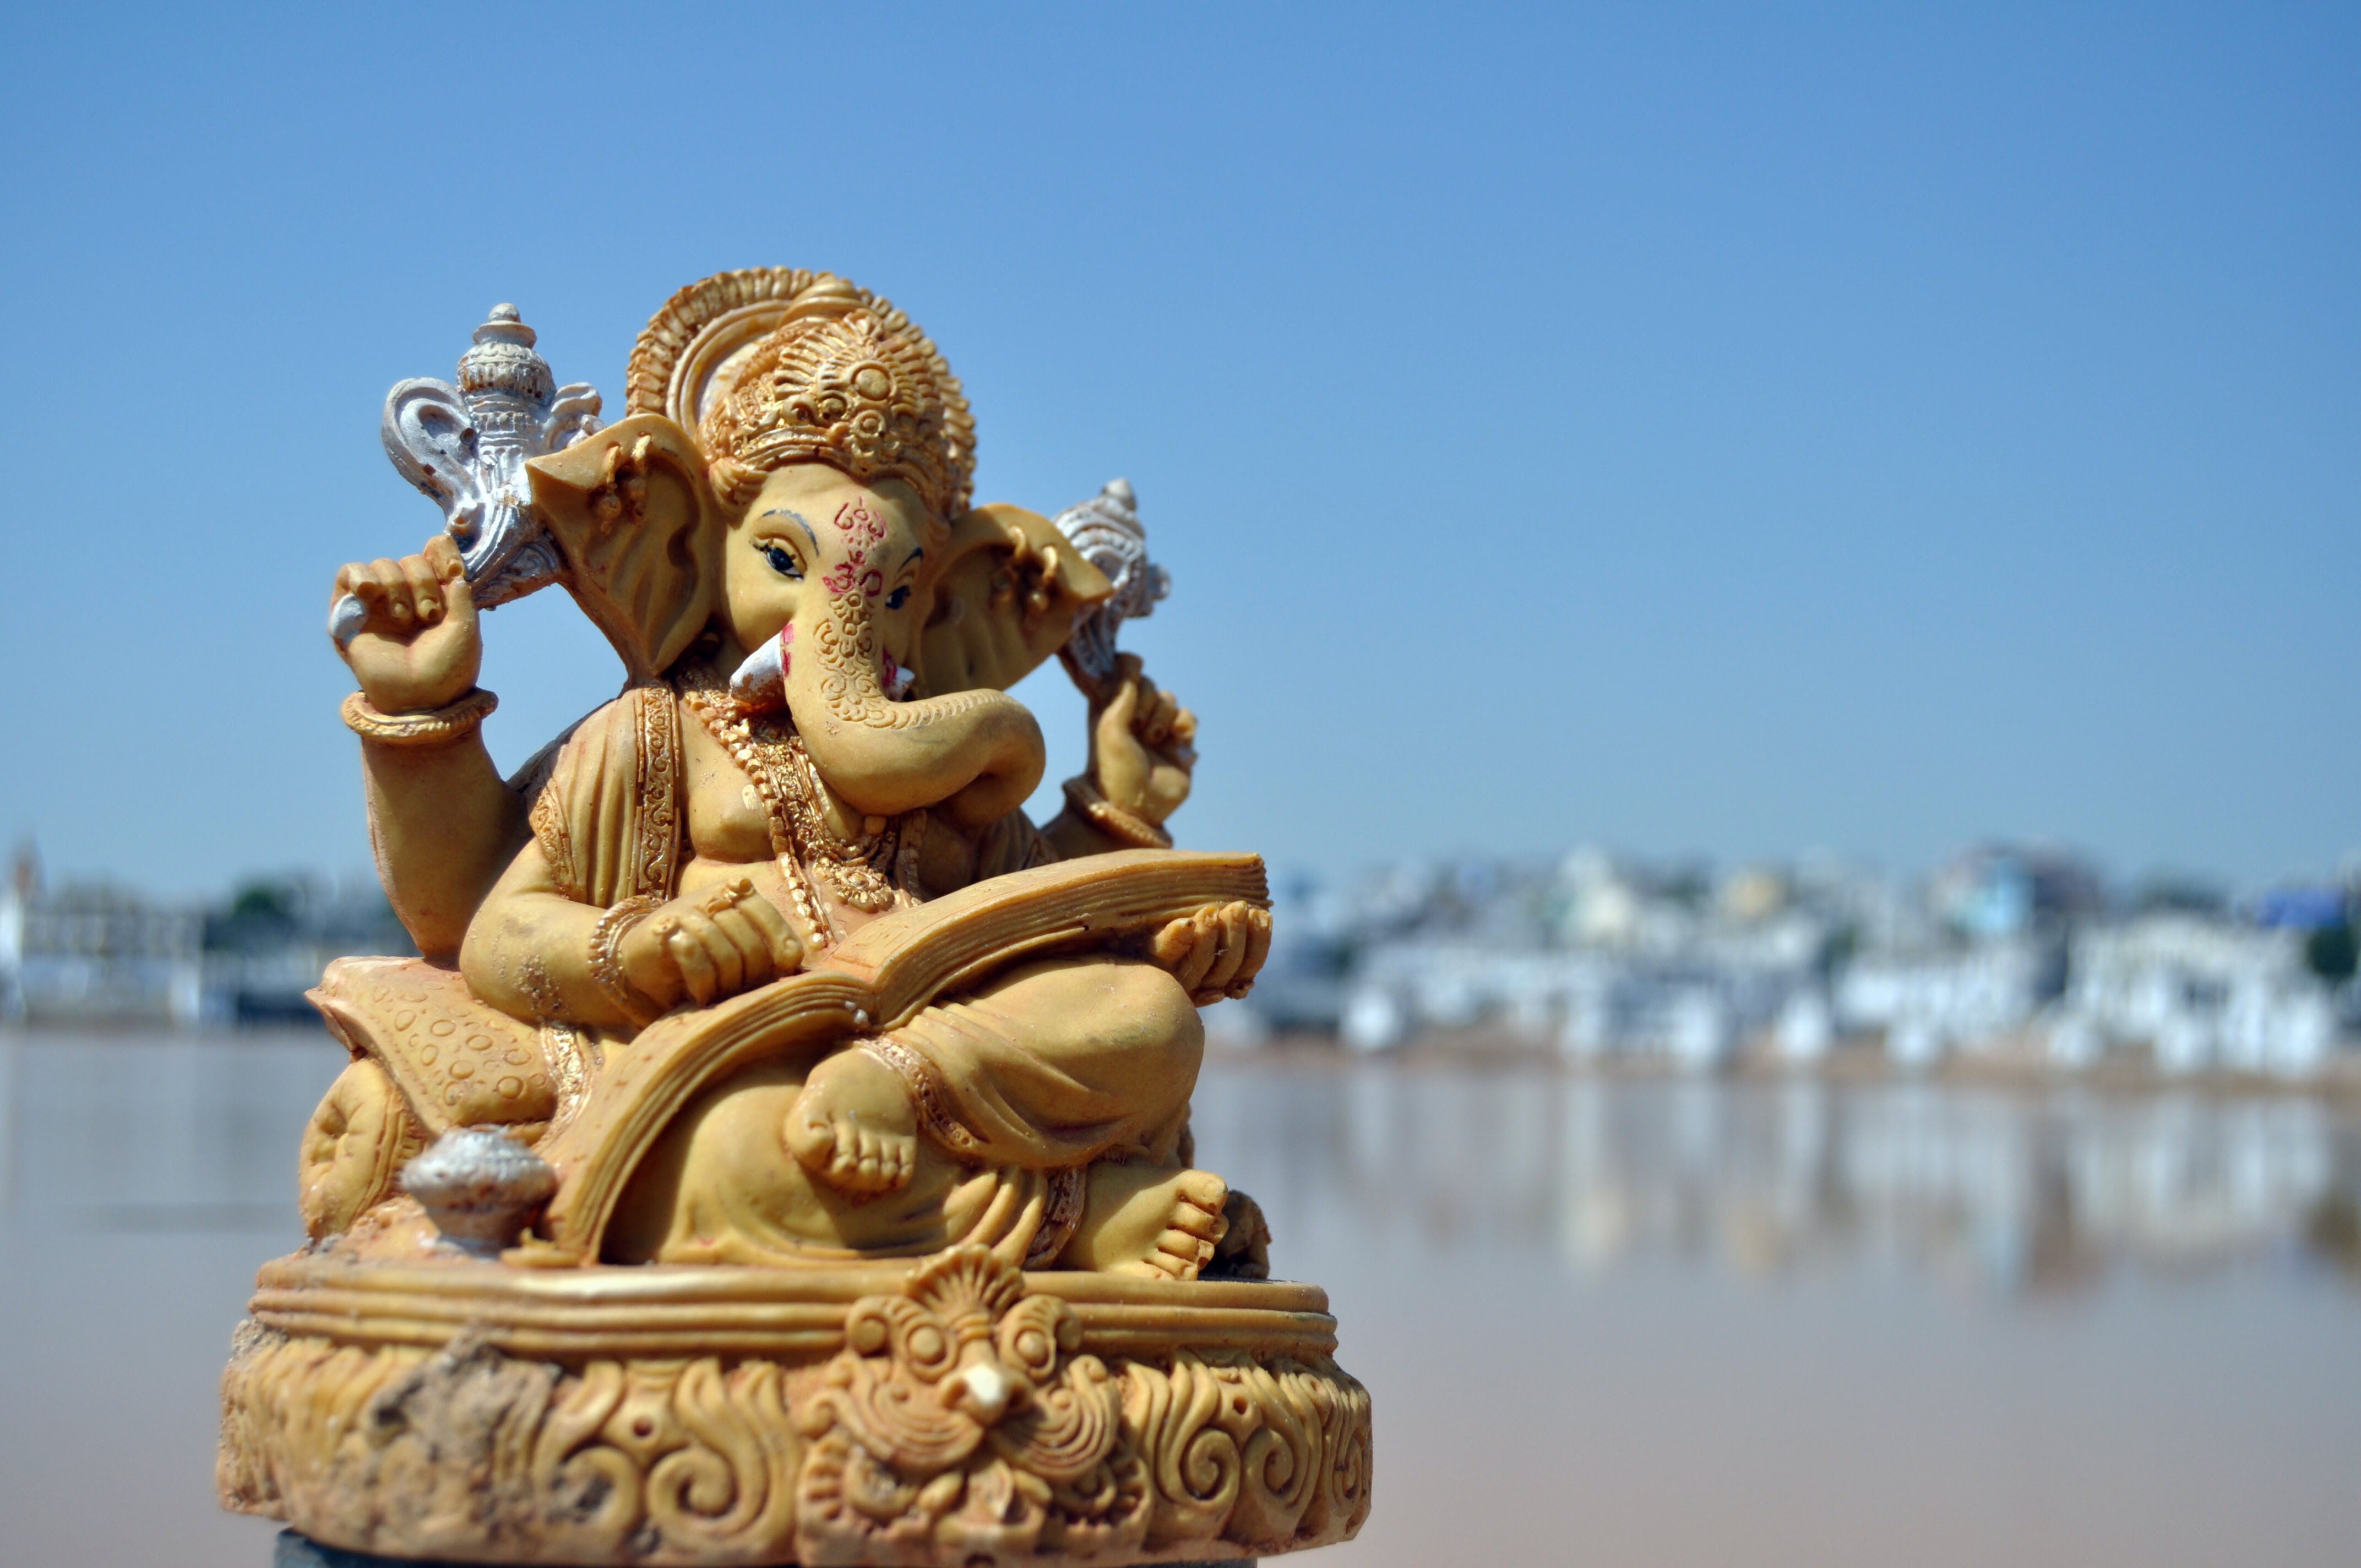 High resolution images of Lord Ganesh for desktop and free download